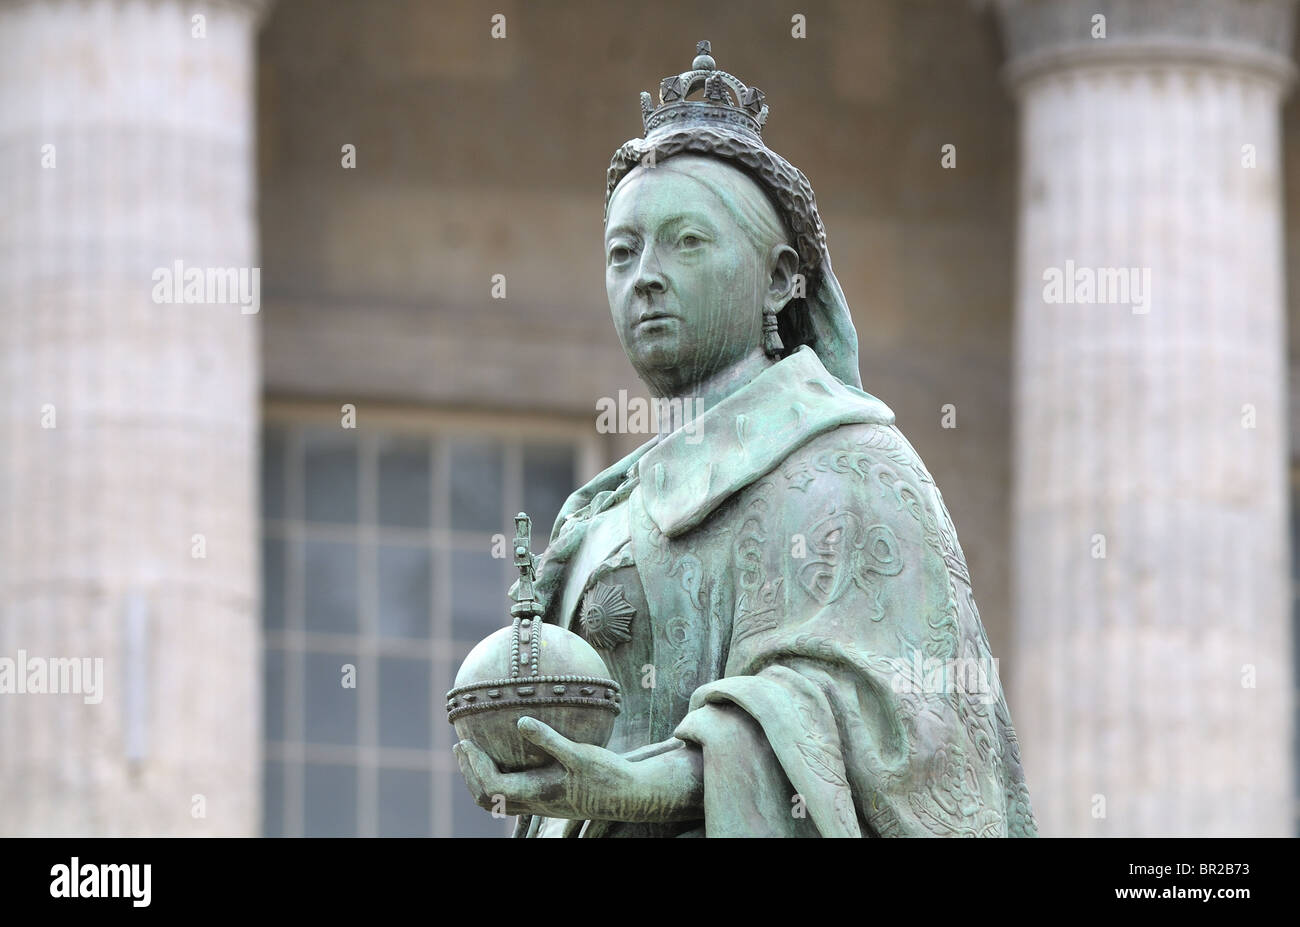 Statue of Queen Victoria in Victoria Square, Birmingham, England. Given by Sir William Henry Barber.  Town Hall in background. Stock Photo